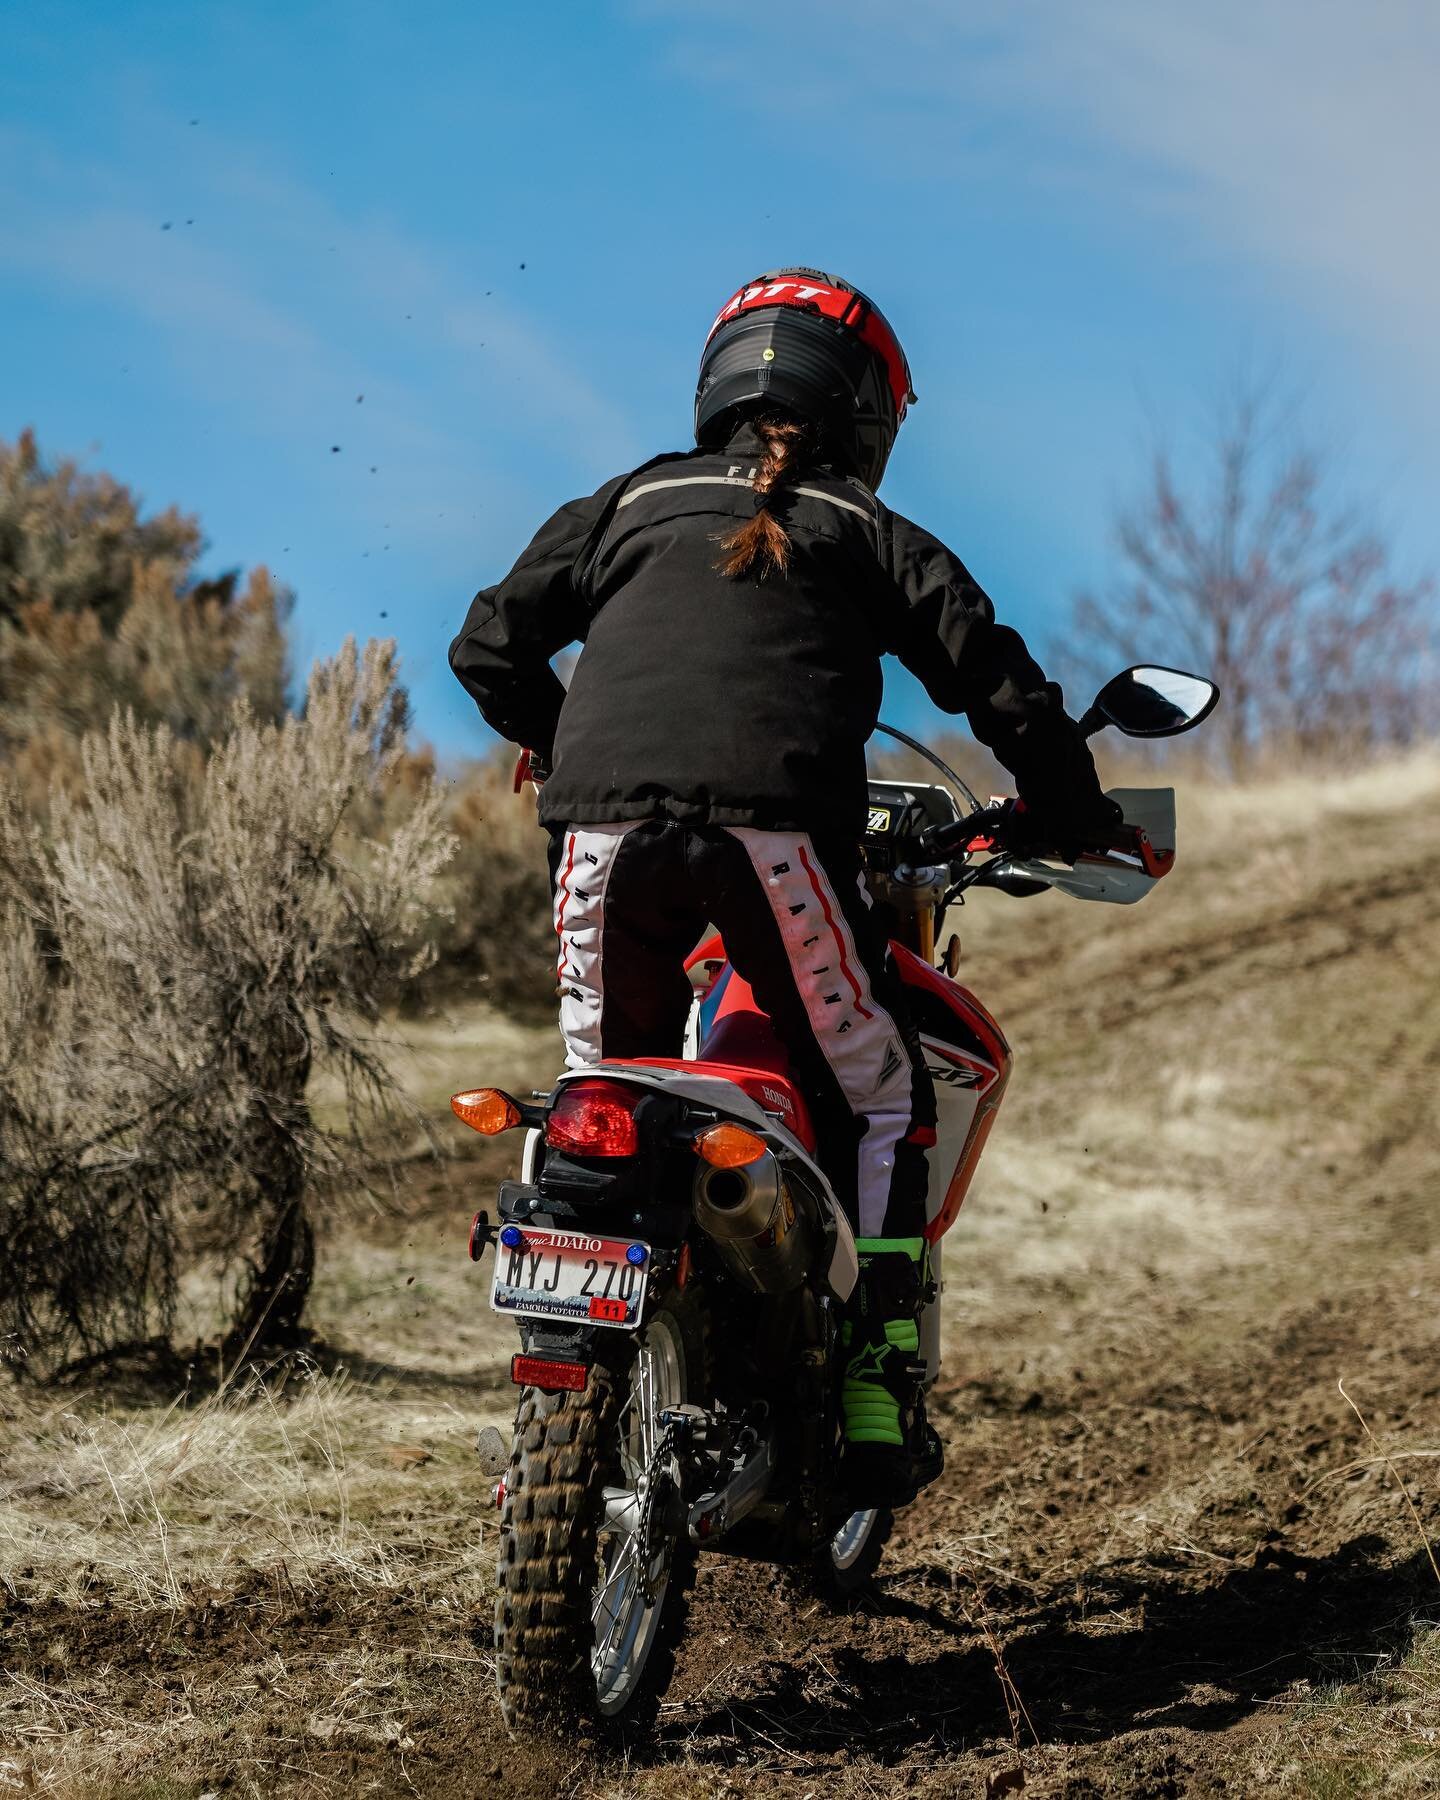 While the CRF250L is a great bike for entry level adventure tourers, the seat height is too tall for most riders to be confident. Our CRF250L-2 lowering link lowers the seat height about 1.5&rdquo; to make your ride a little more enjoyable.

📸 @tare